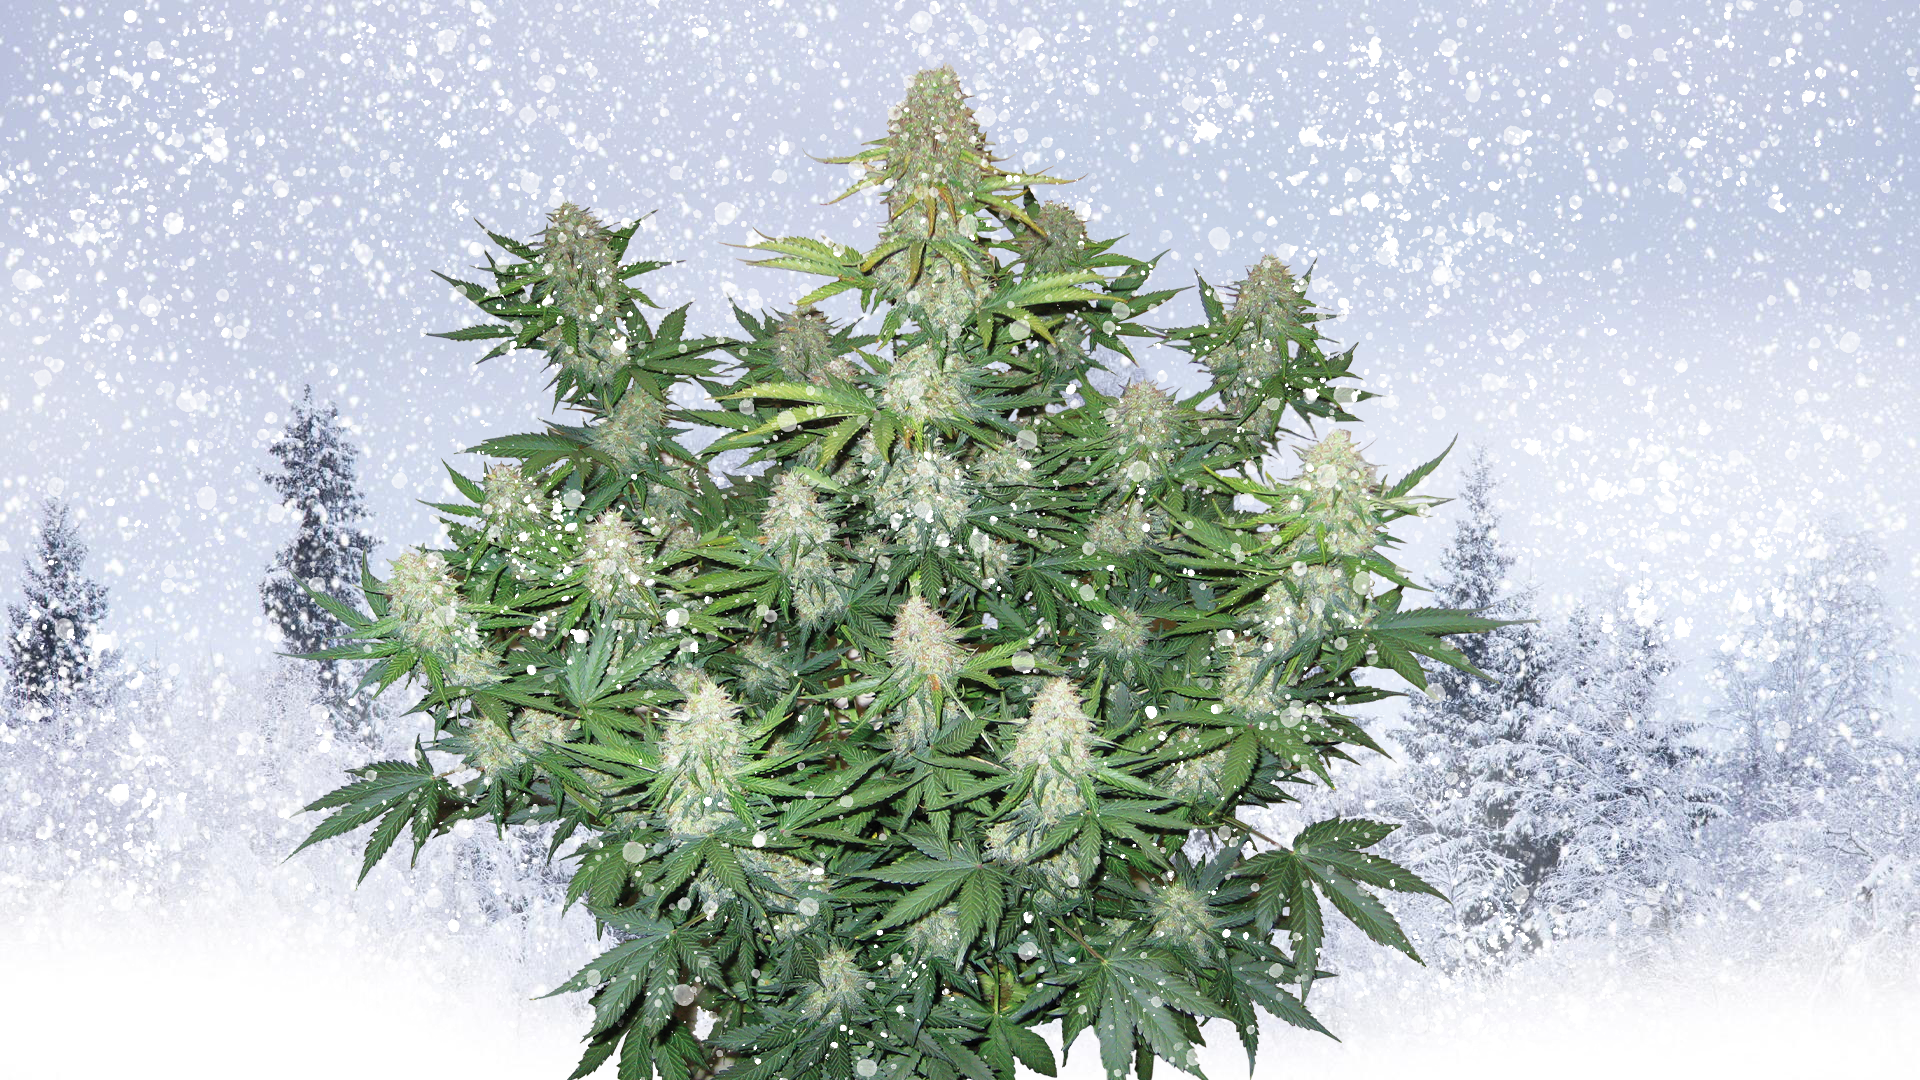 https://dutch-passion.blog/wp-content/uploads/2020/12/growing-cannabis-in-cold-climates.png